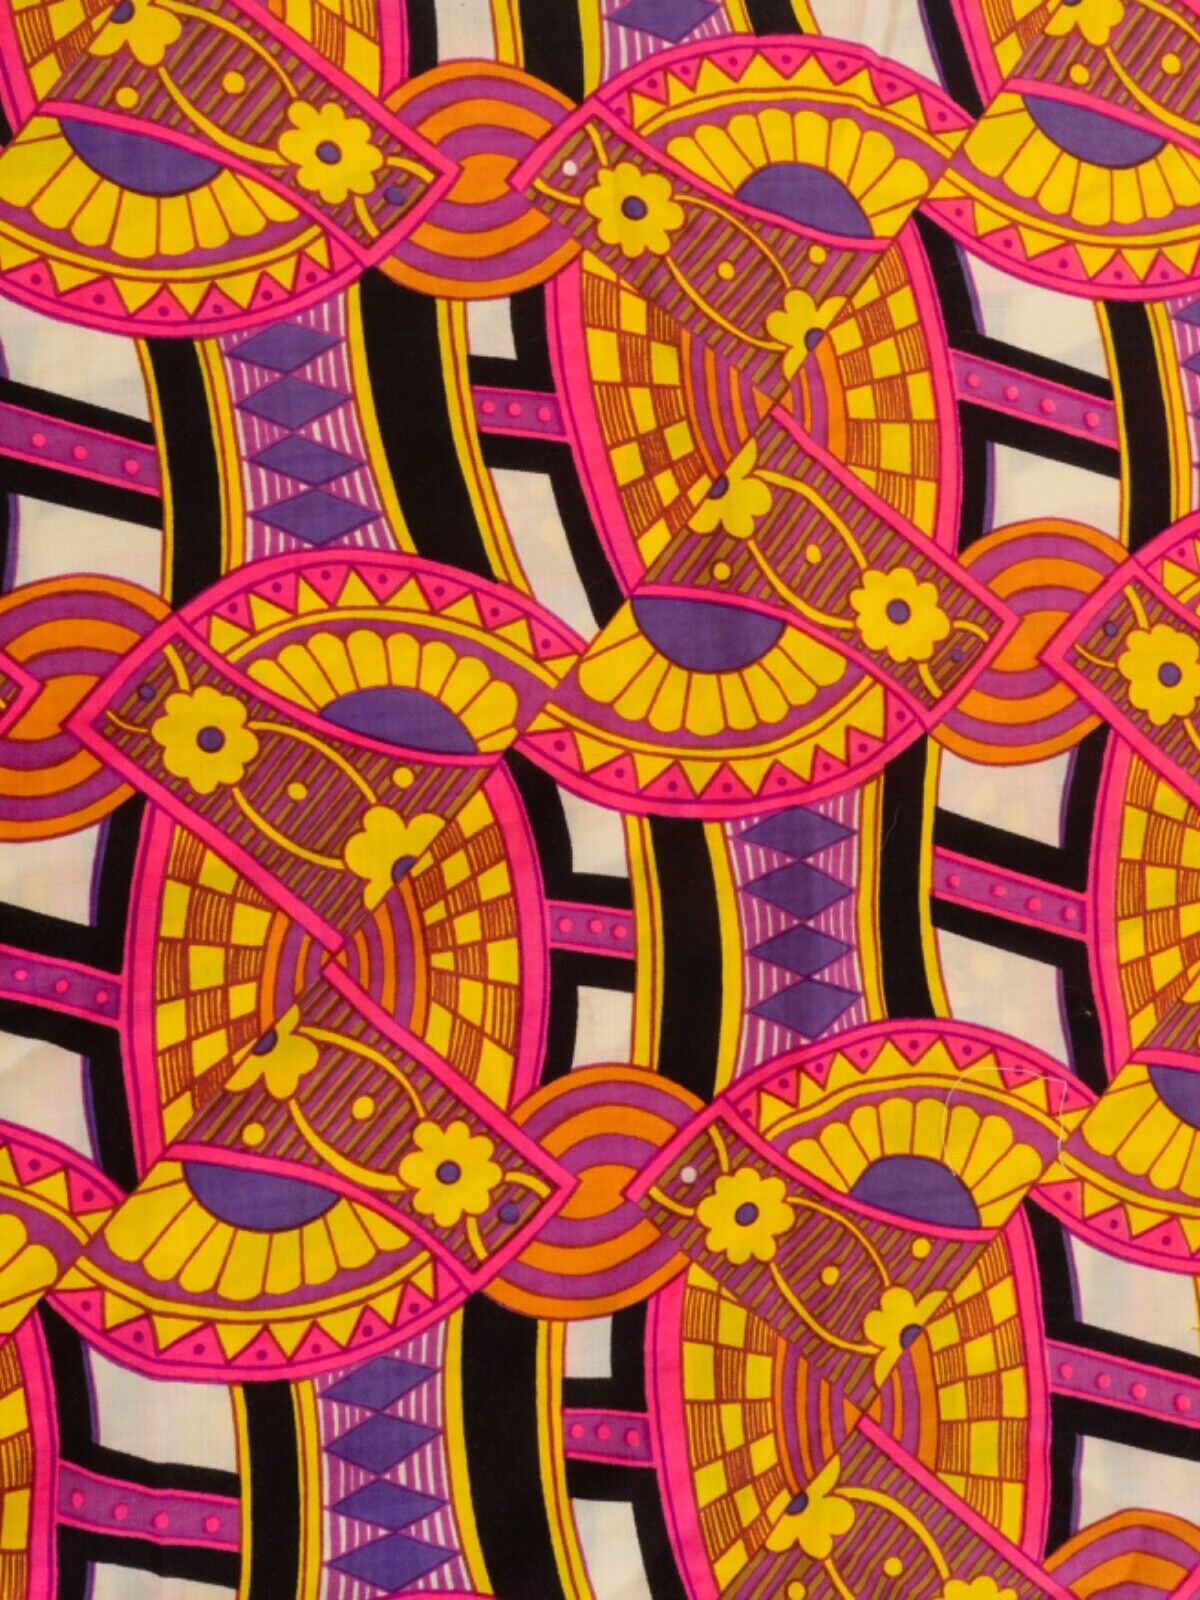 1960s Psychedelic Printed Cotton Blend Twill Peter Max Influenced Design 44x82